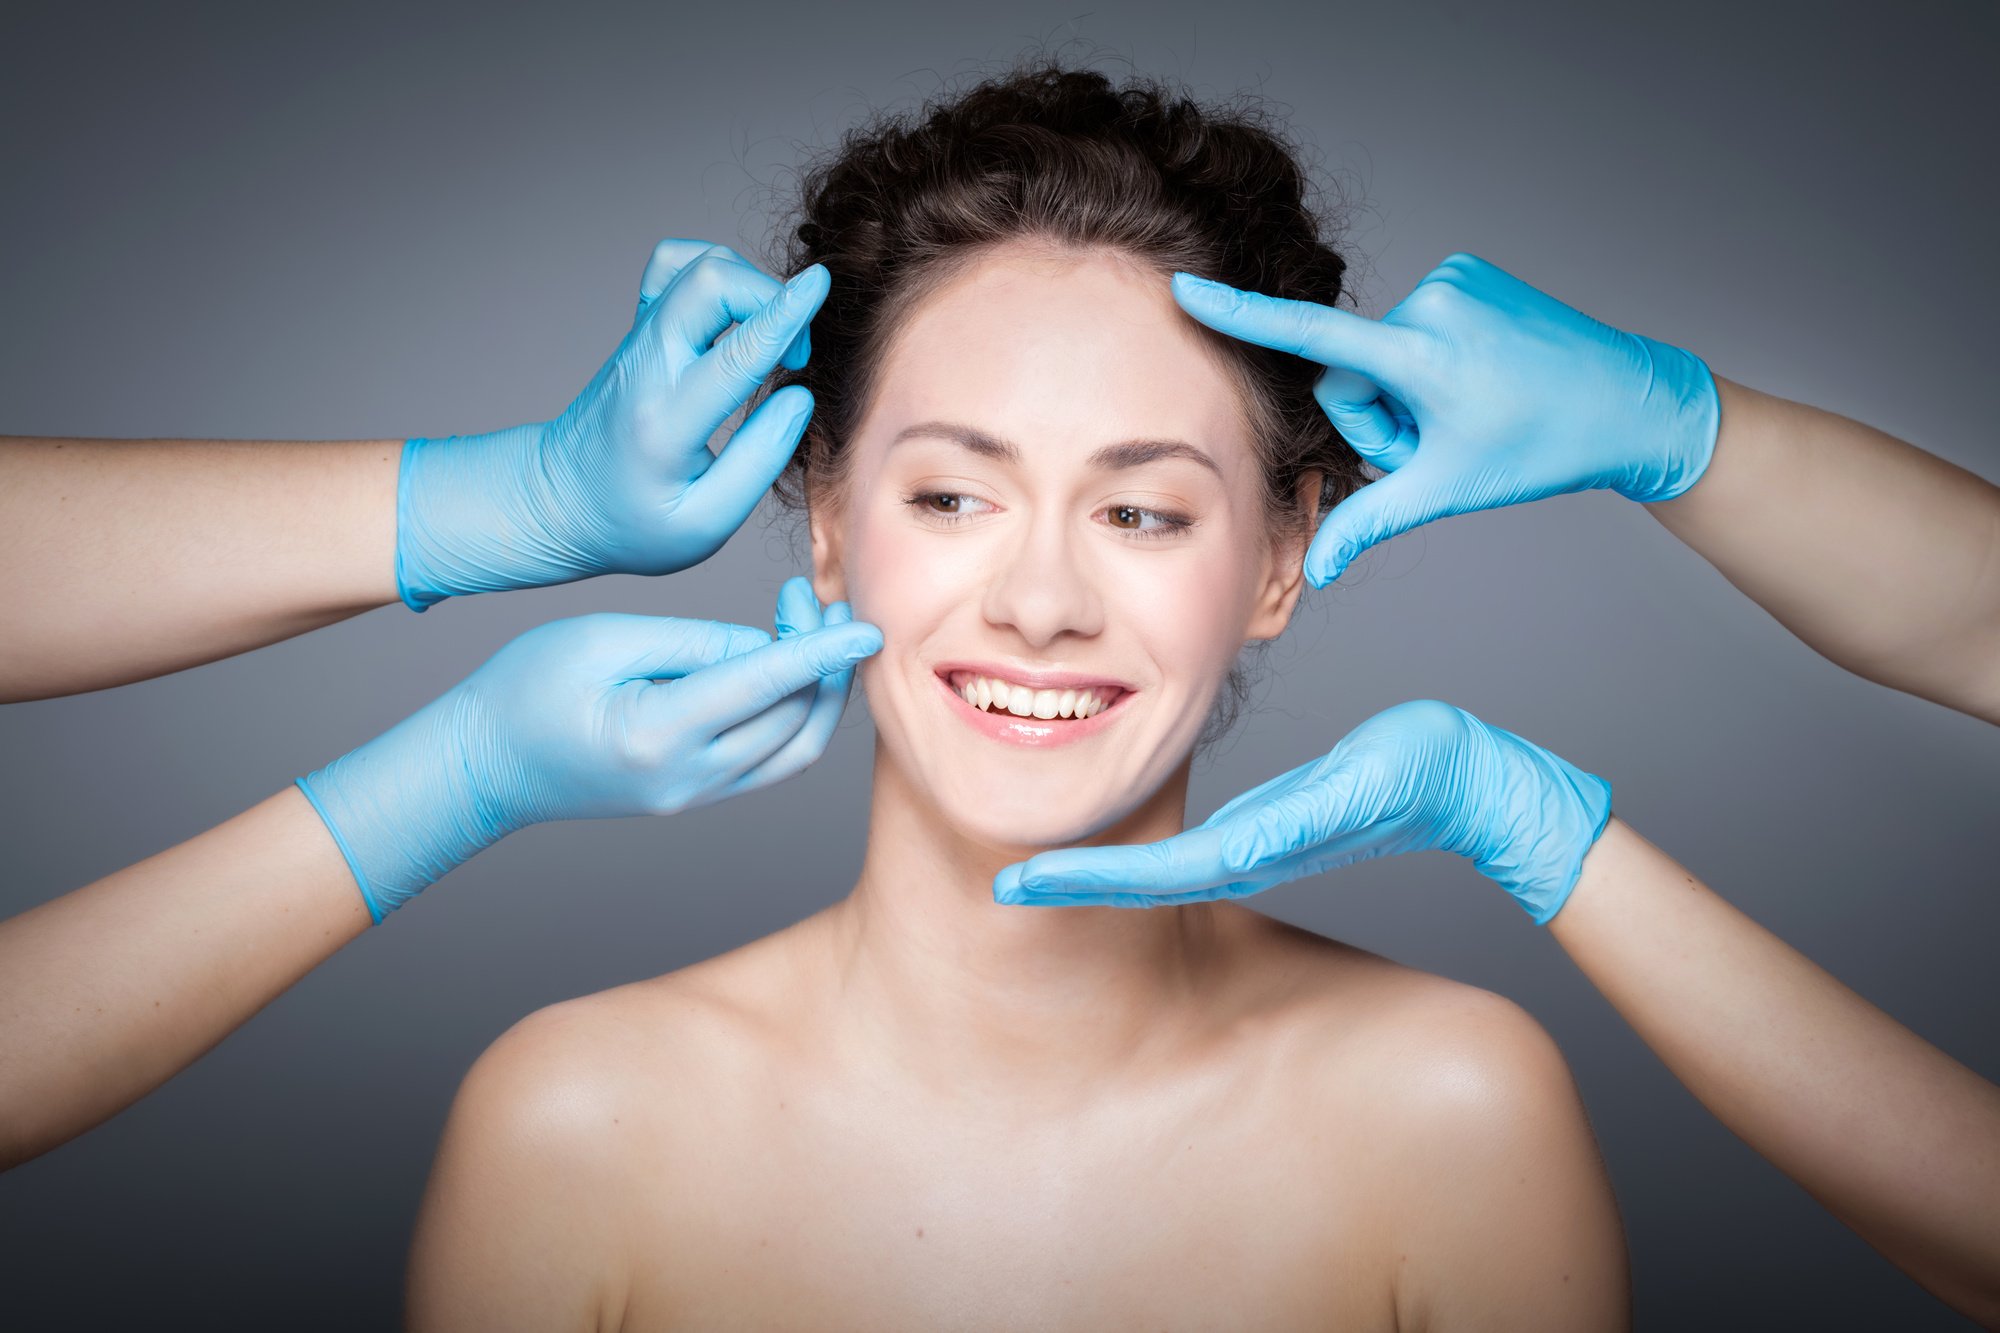 Are you searching for the best surgeons in Arizona? In this brief guide, you can read about what to expect from a professional plastic surgeon.